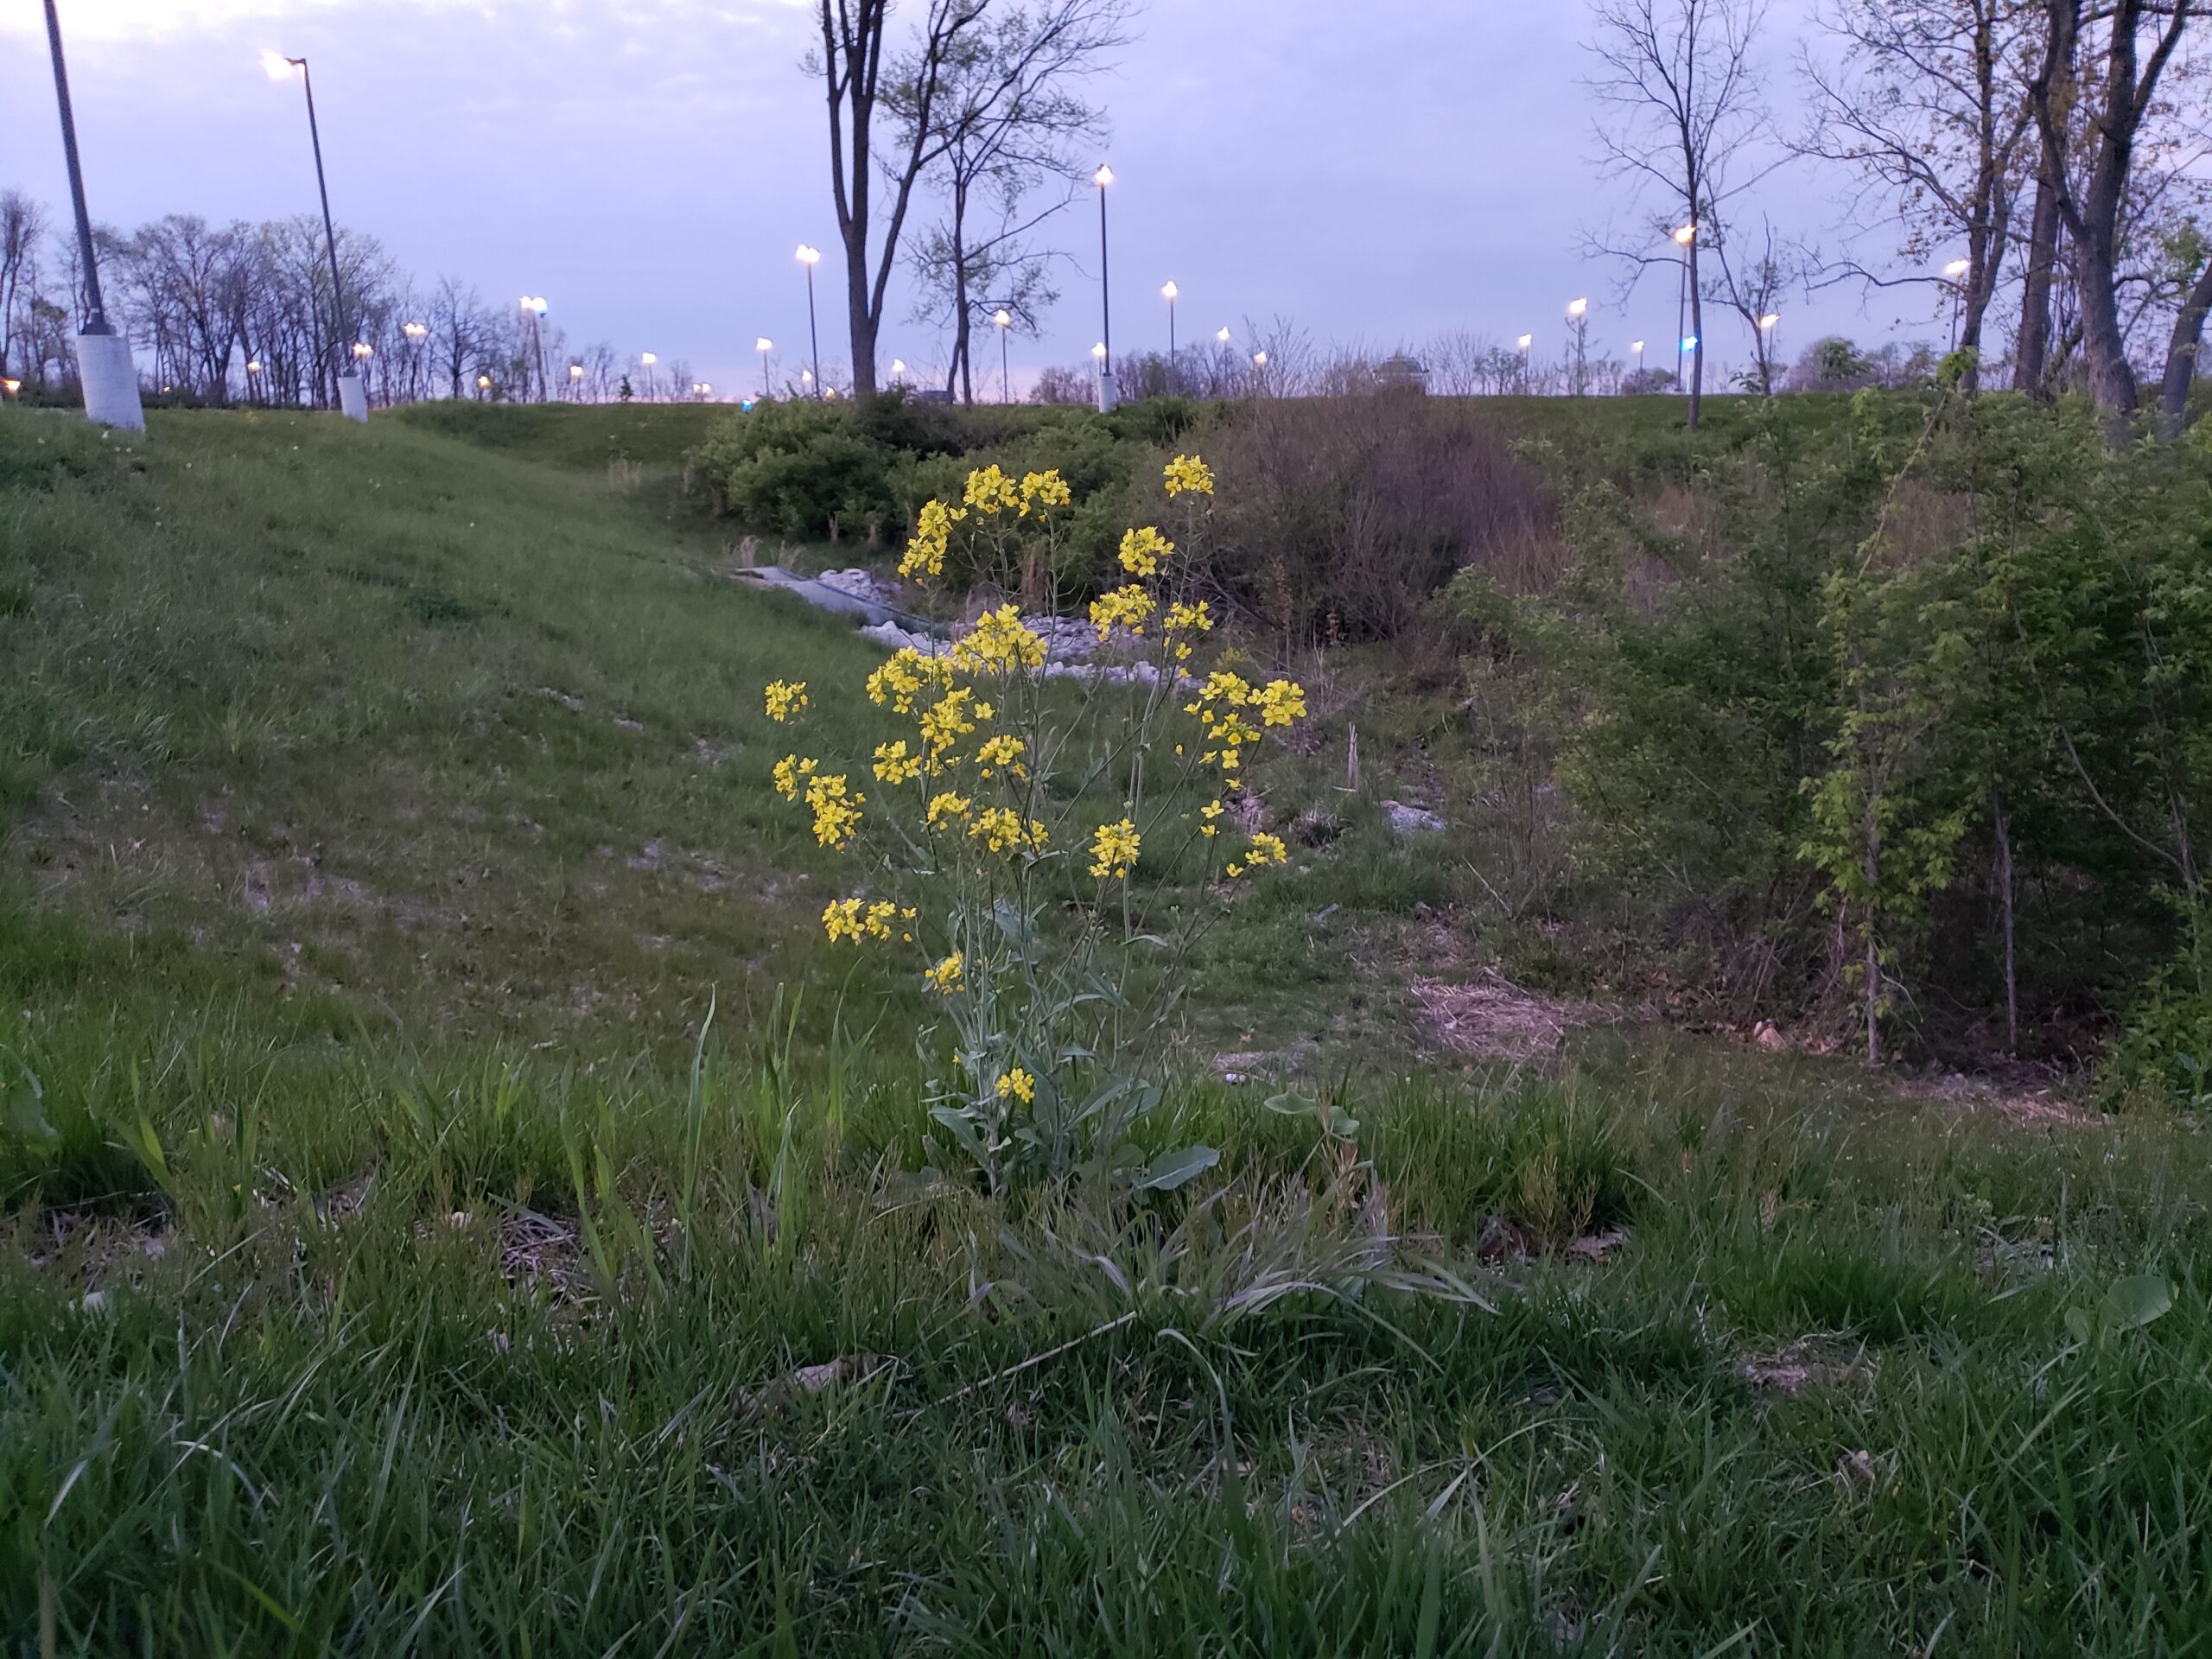 Image of yellow flowers against against a blue/purple evening sky.